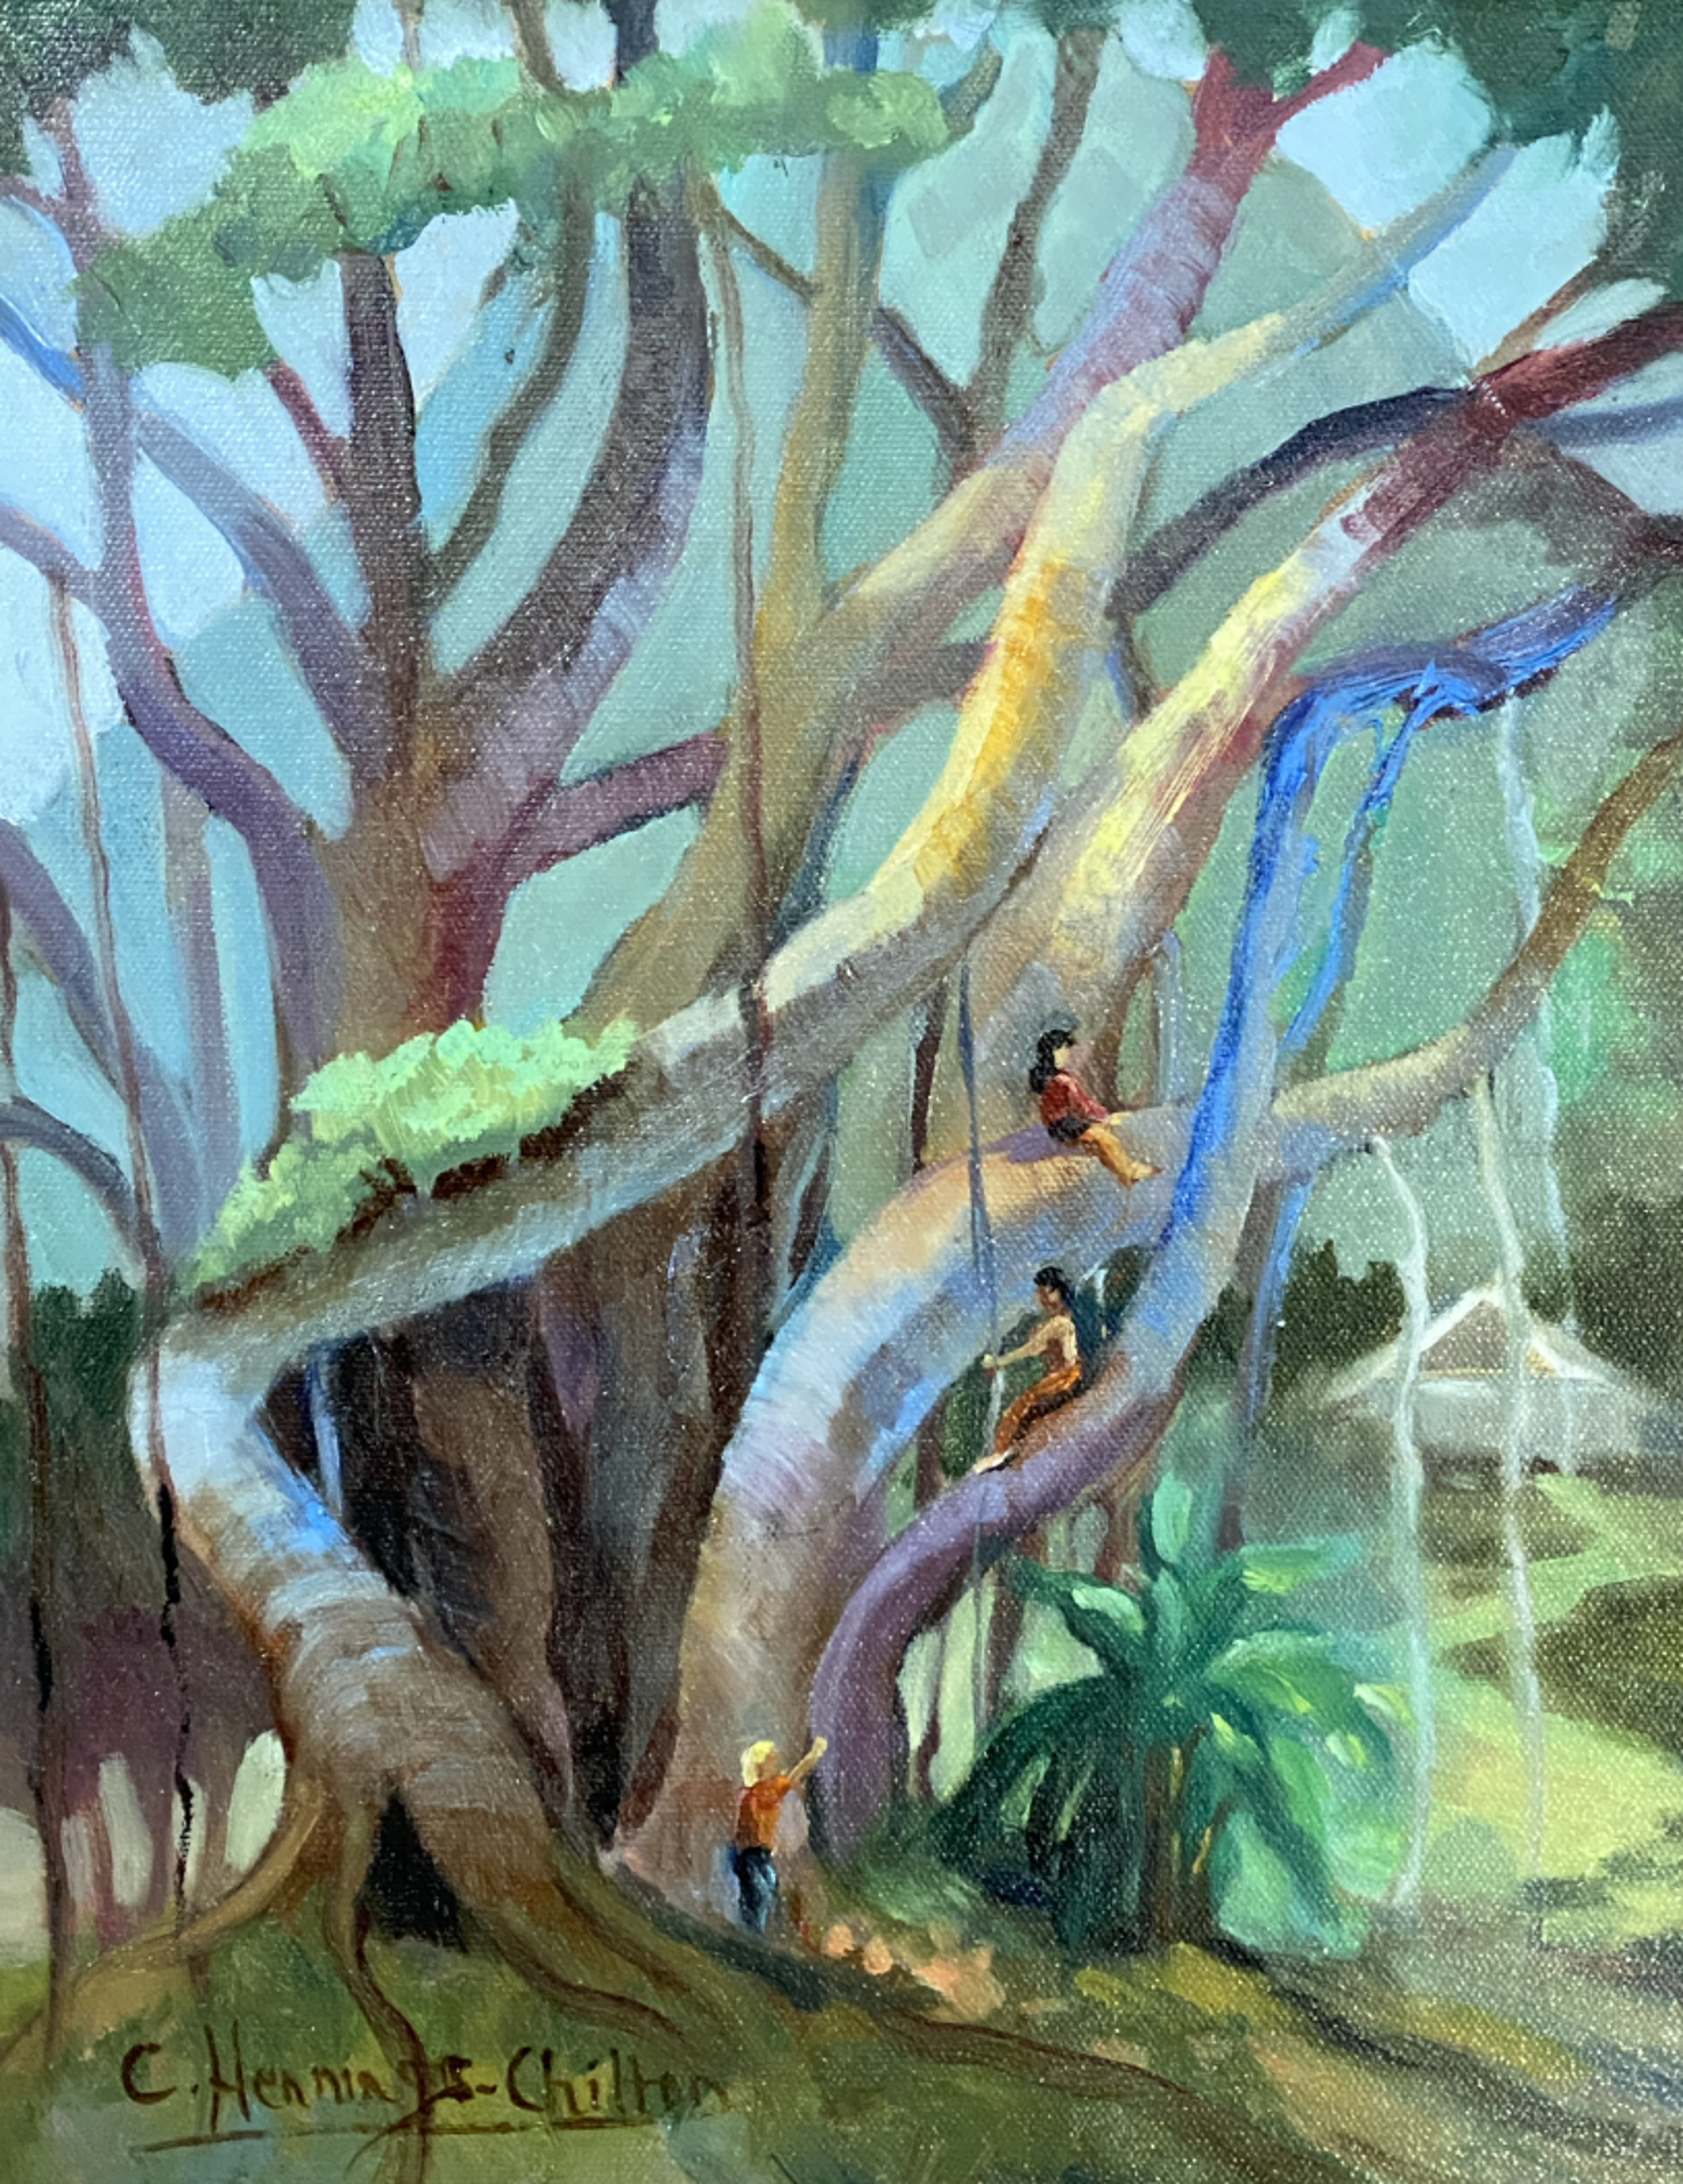 Magical Tree by Connie Hennings-Chilton